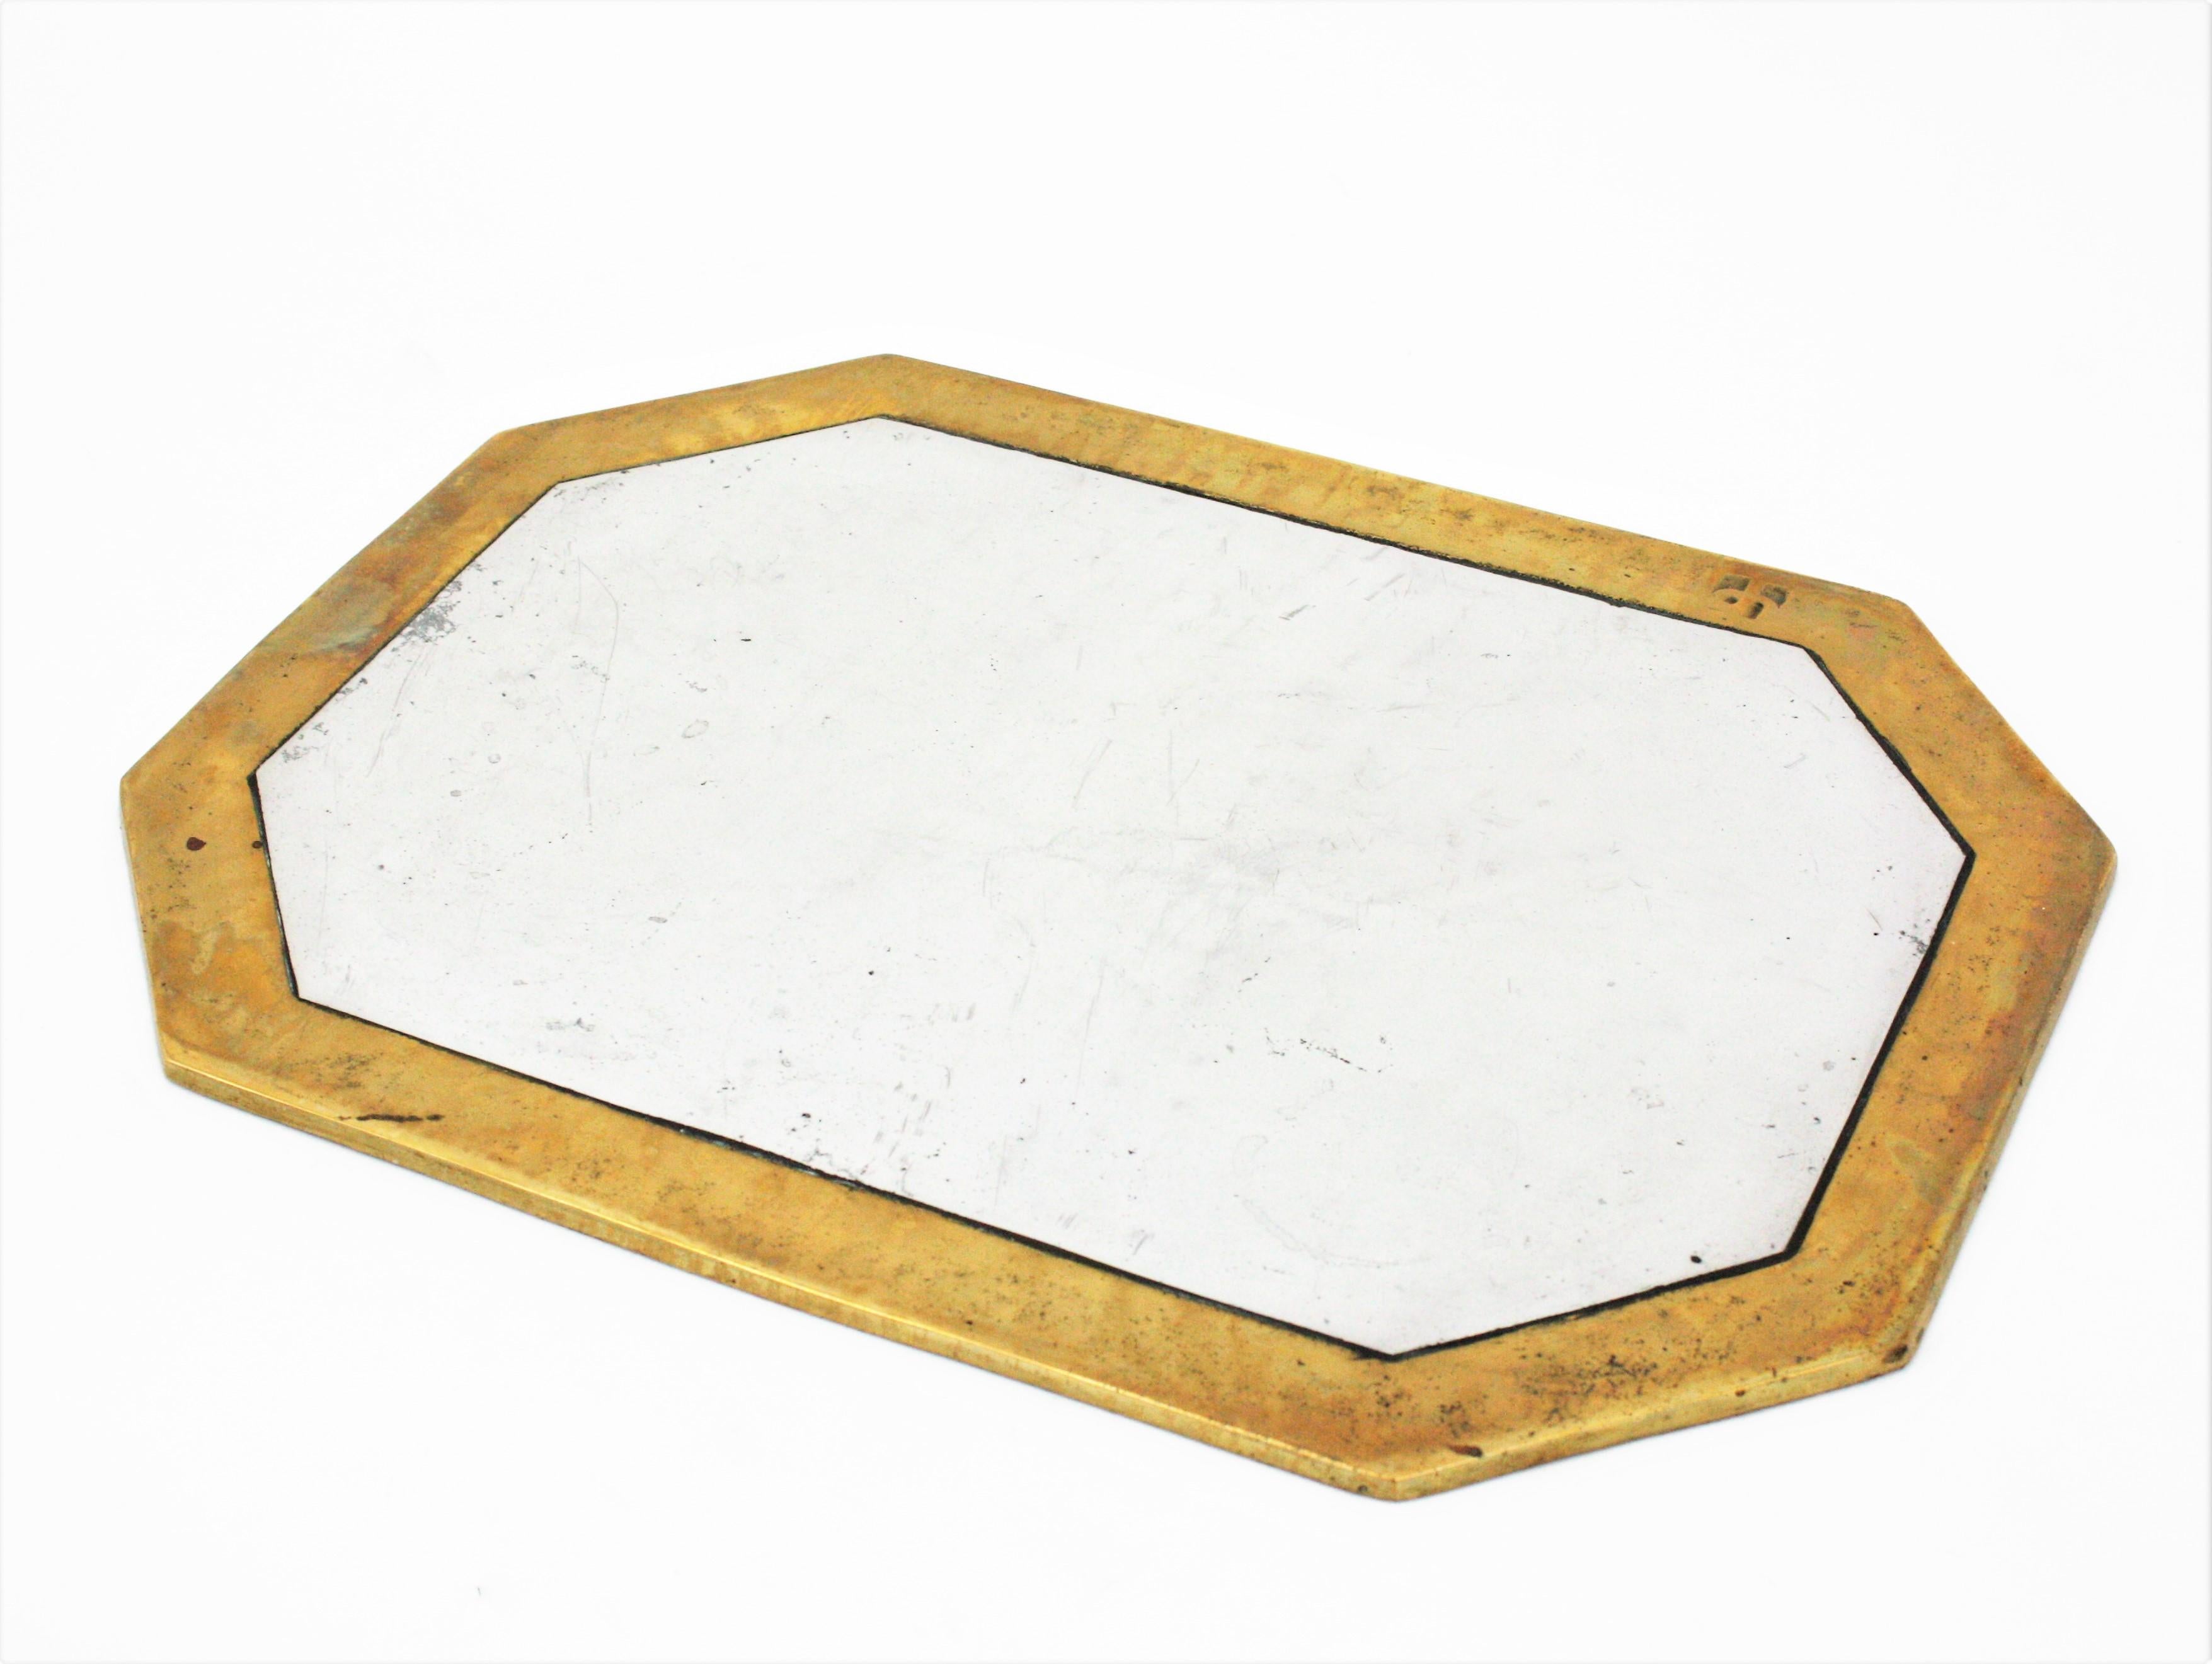 David Marshall Brutalist Octagonal Tray or Table Coaster, Spain, 1980s For Sale 6